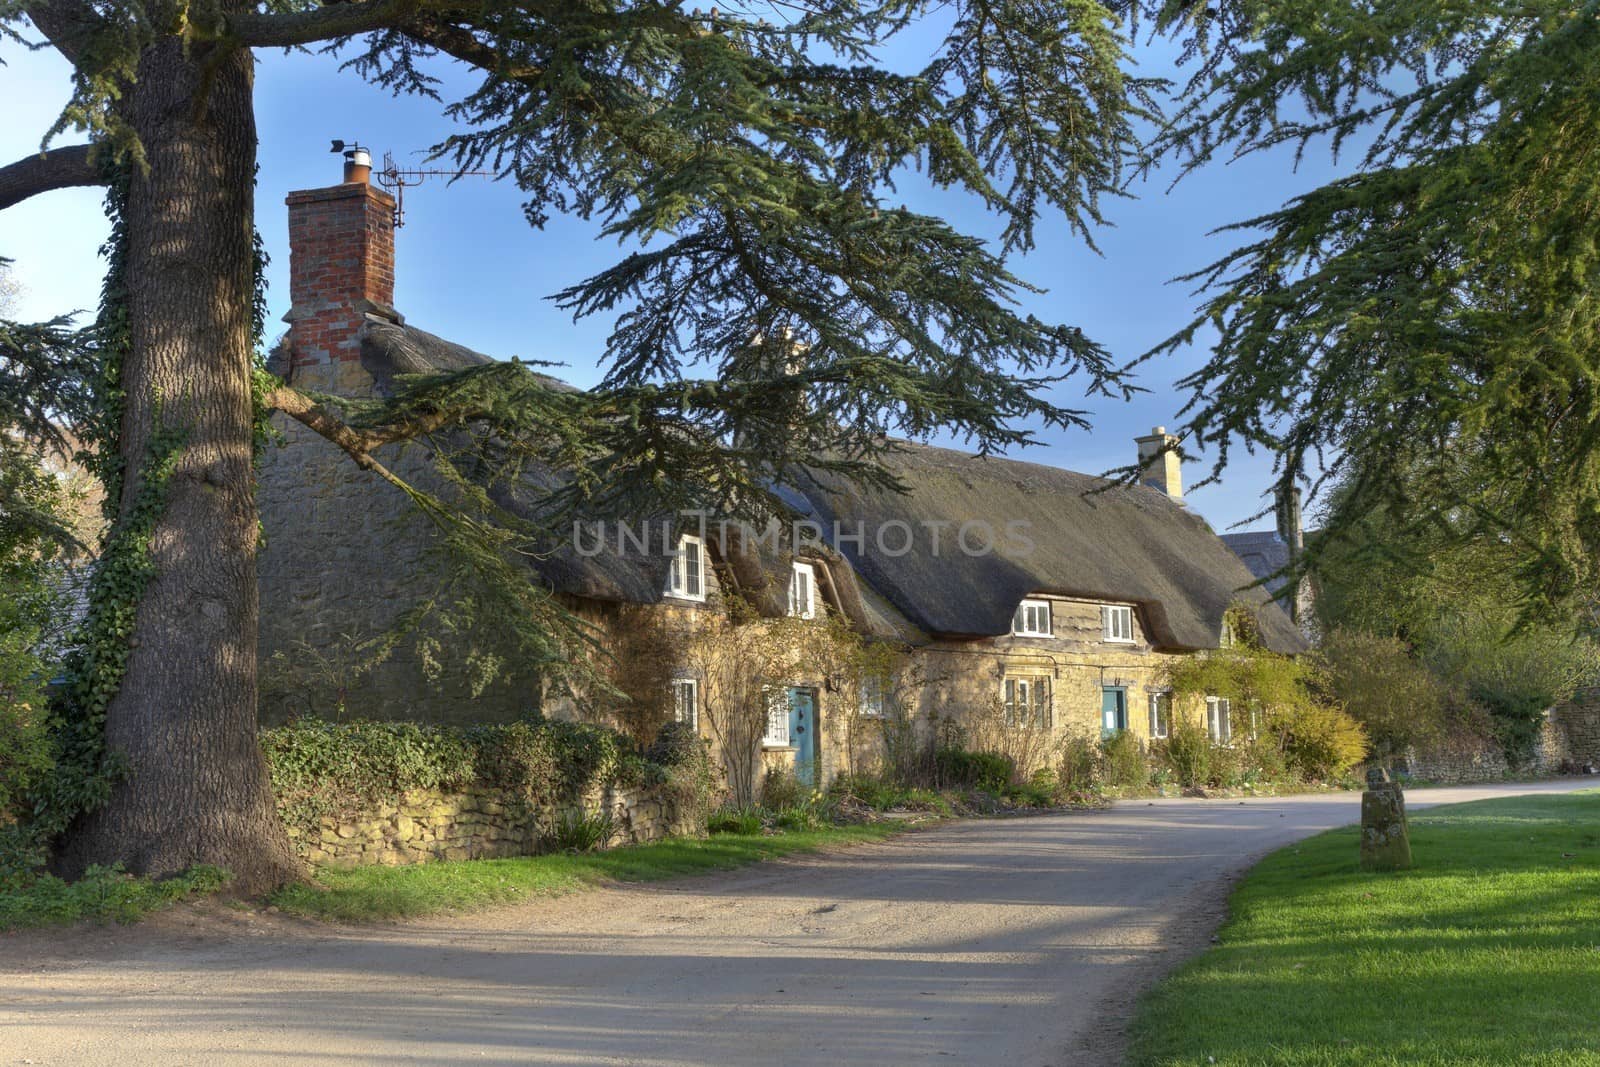 The tiny village of Hidcote Bartrim near Hidcote Gardens, Chipping Campden, Gloucestershire, England.